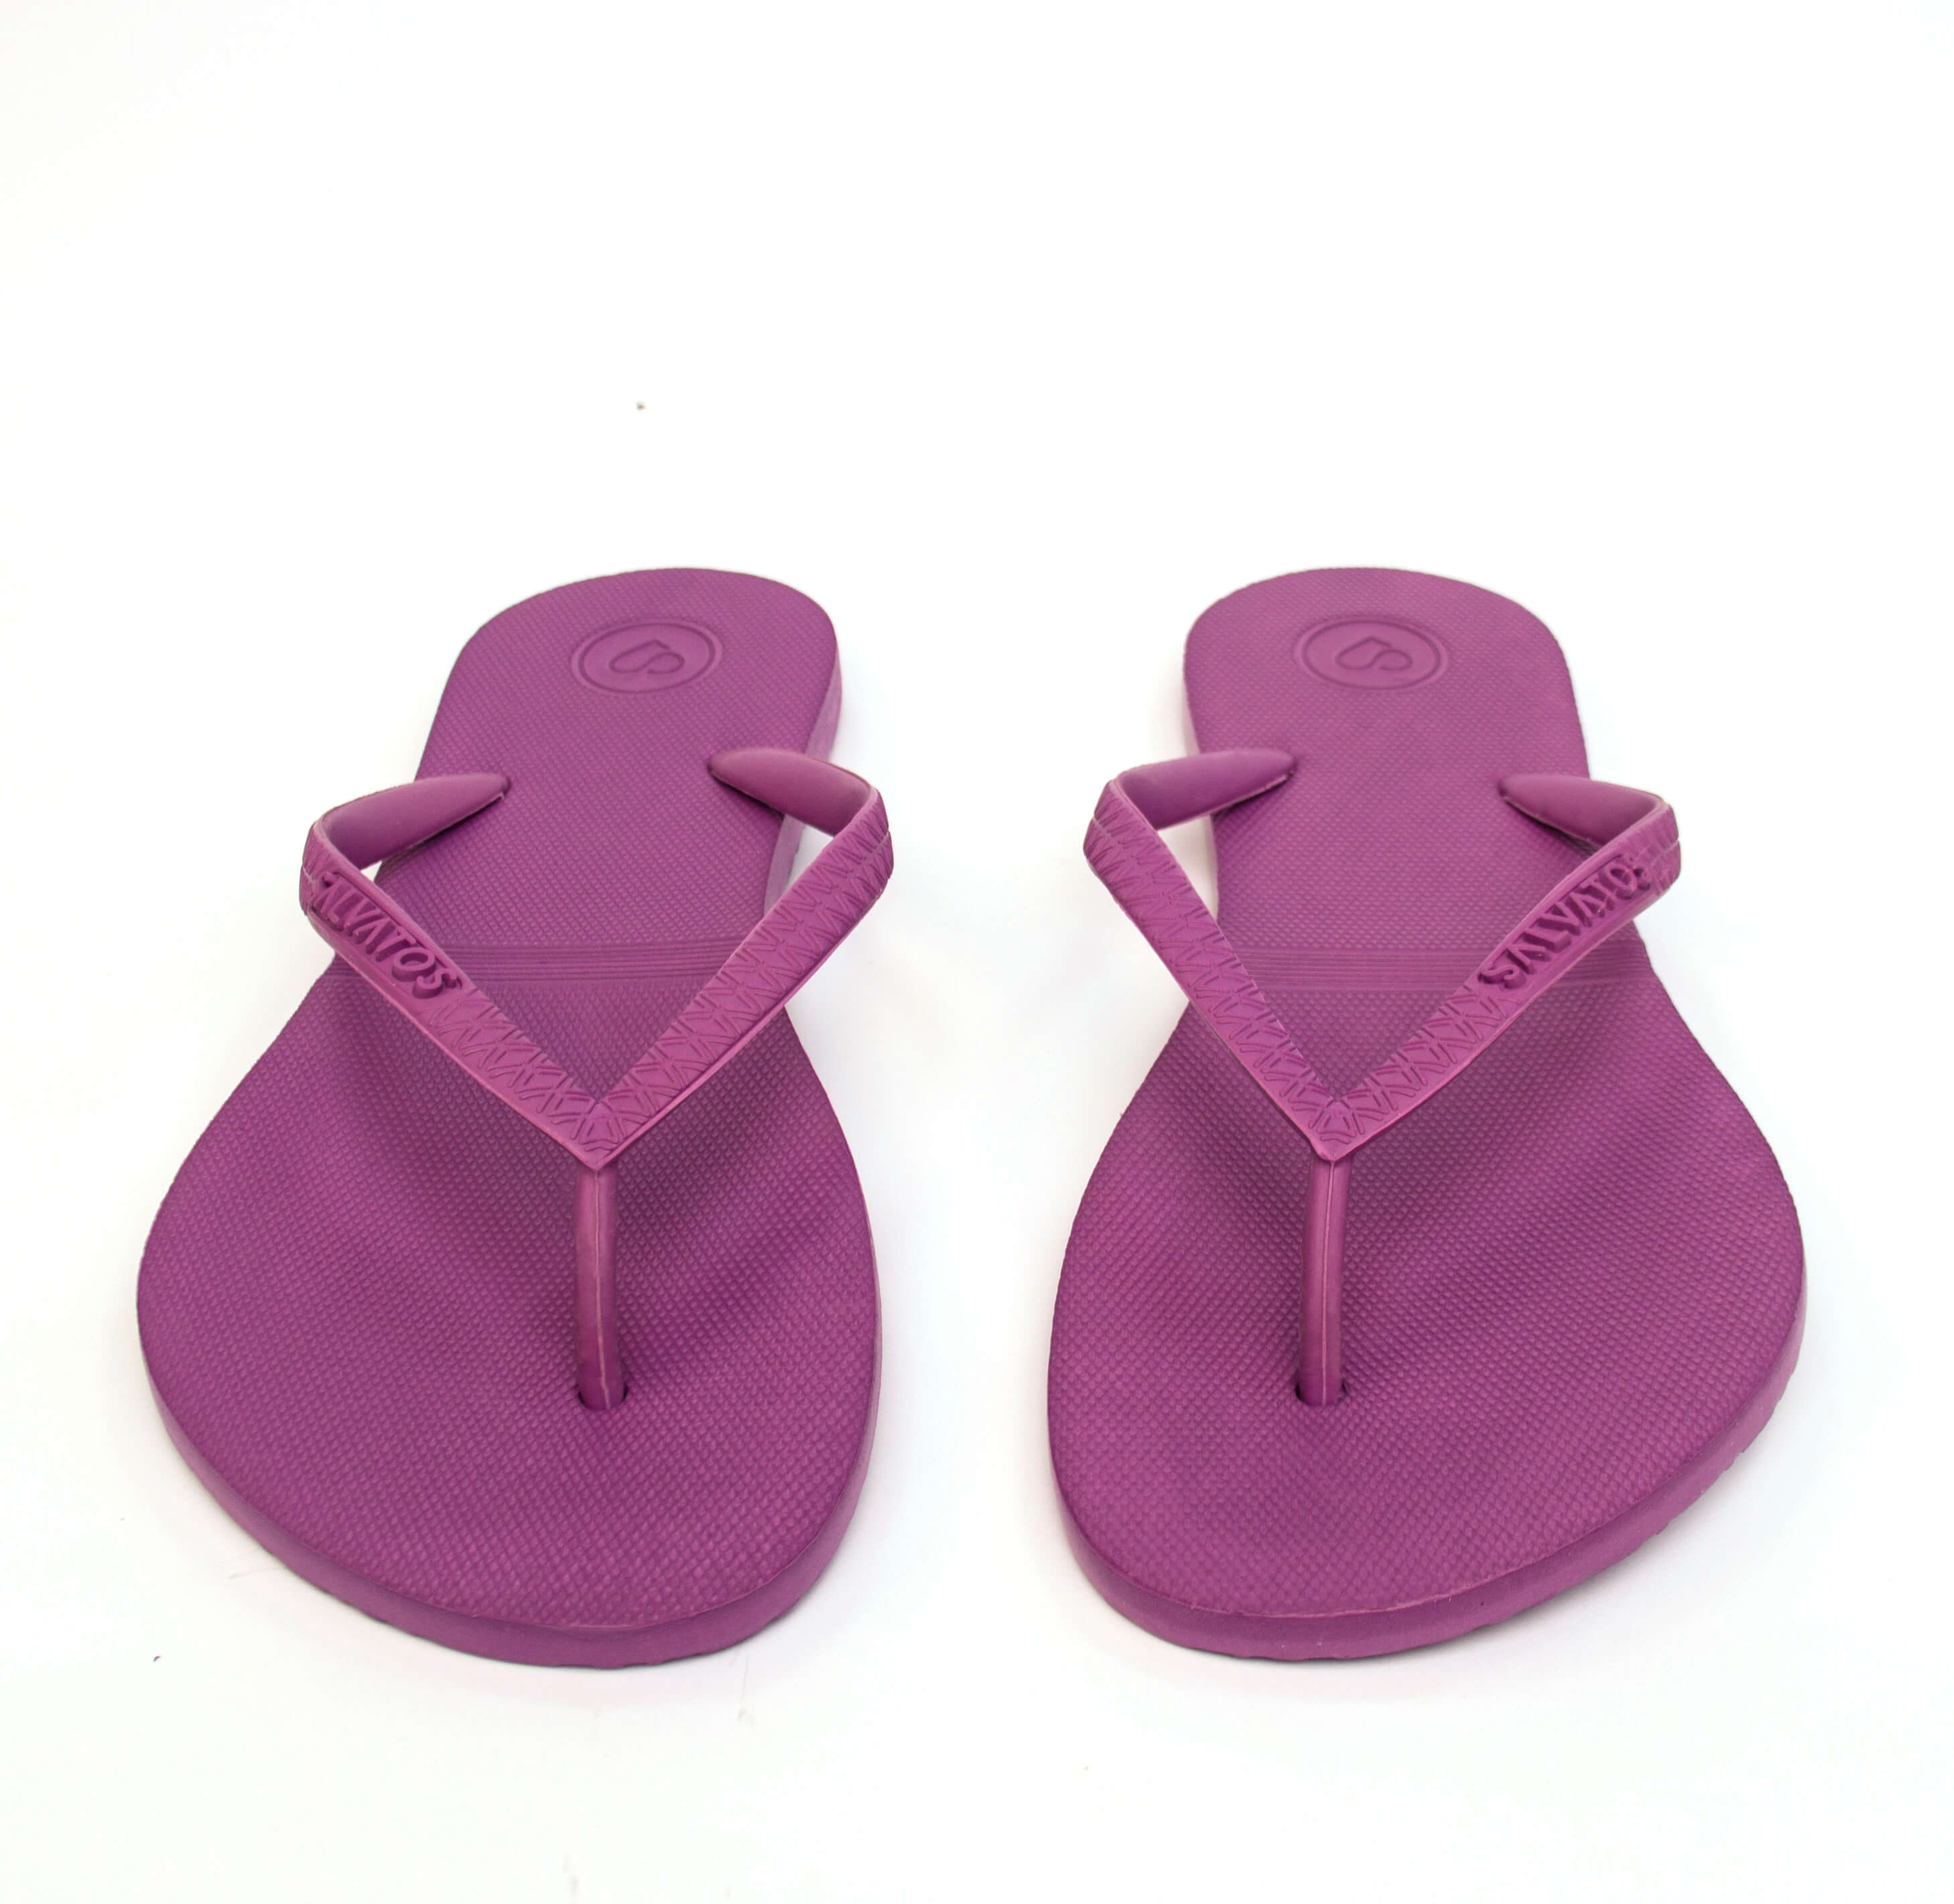 Grapy | Salvatos SA - Foldable Flip Flops in South Africa